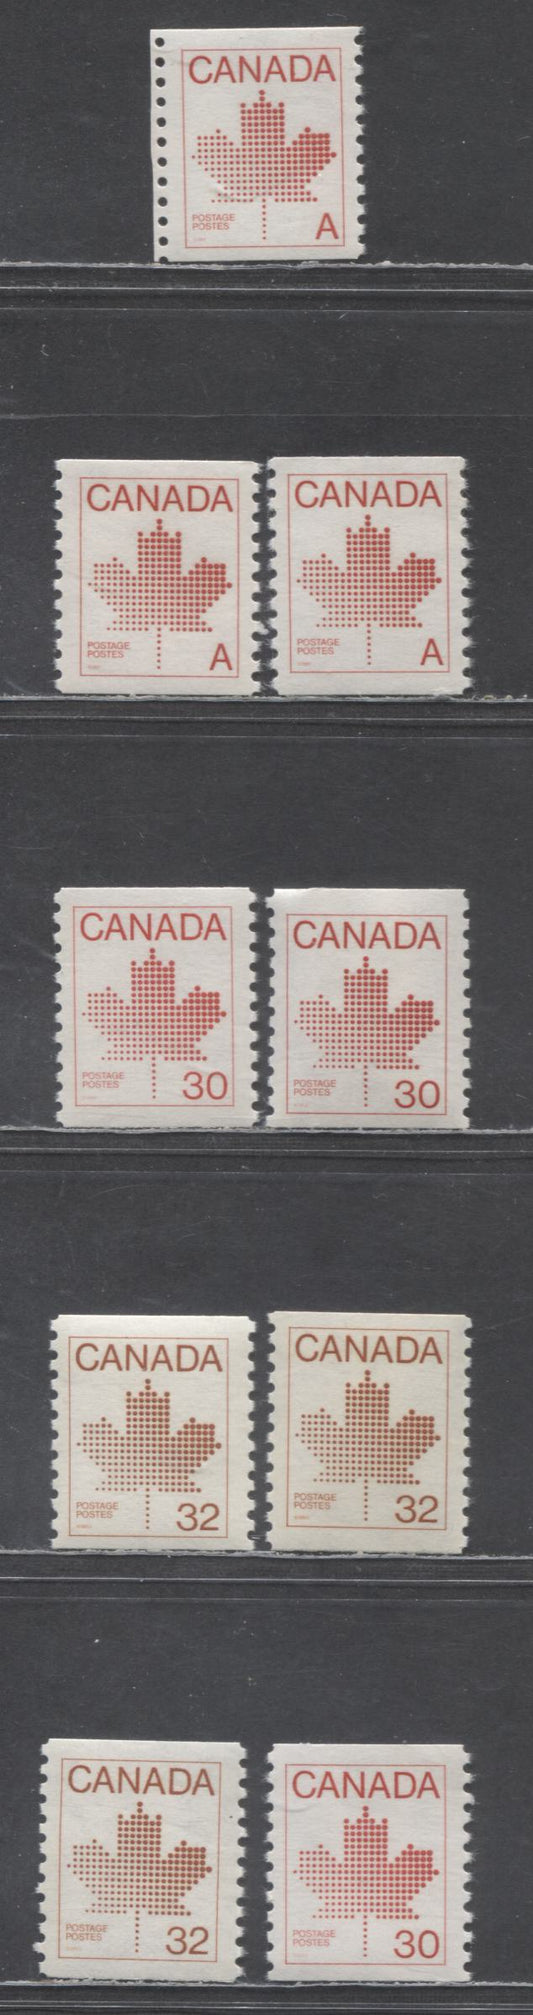 Lot 319 Canada #908,ii,950, 951,iii A(30c), 30c & 32c Red Maple Leaf, 1981-1983 Non-Denominated 'A' Definitive, 8 VFNH Singles On Various Abitibi & Clark Papers